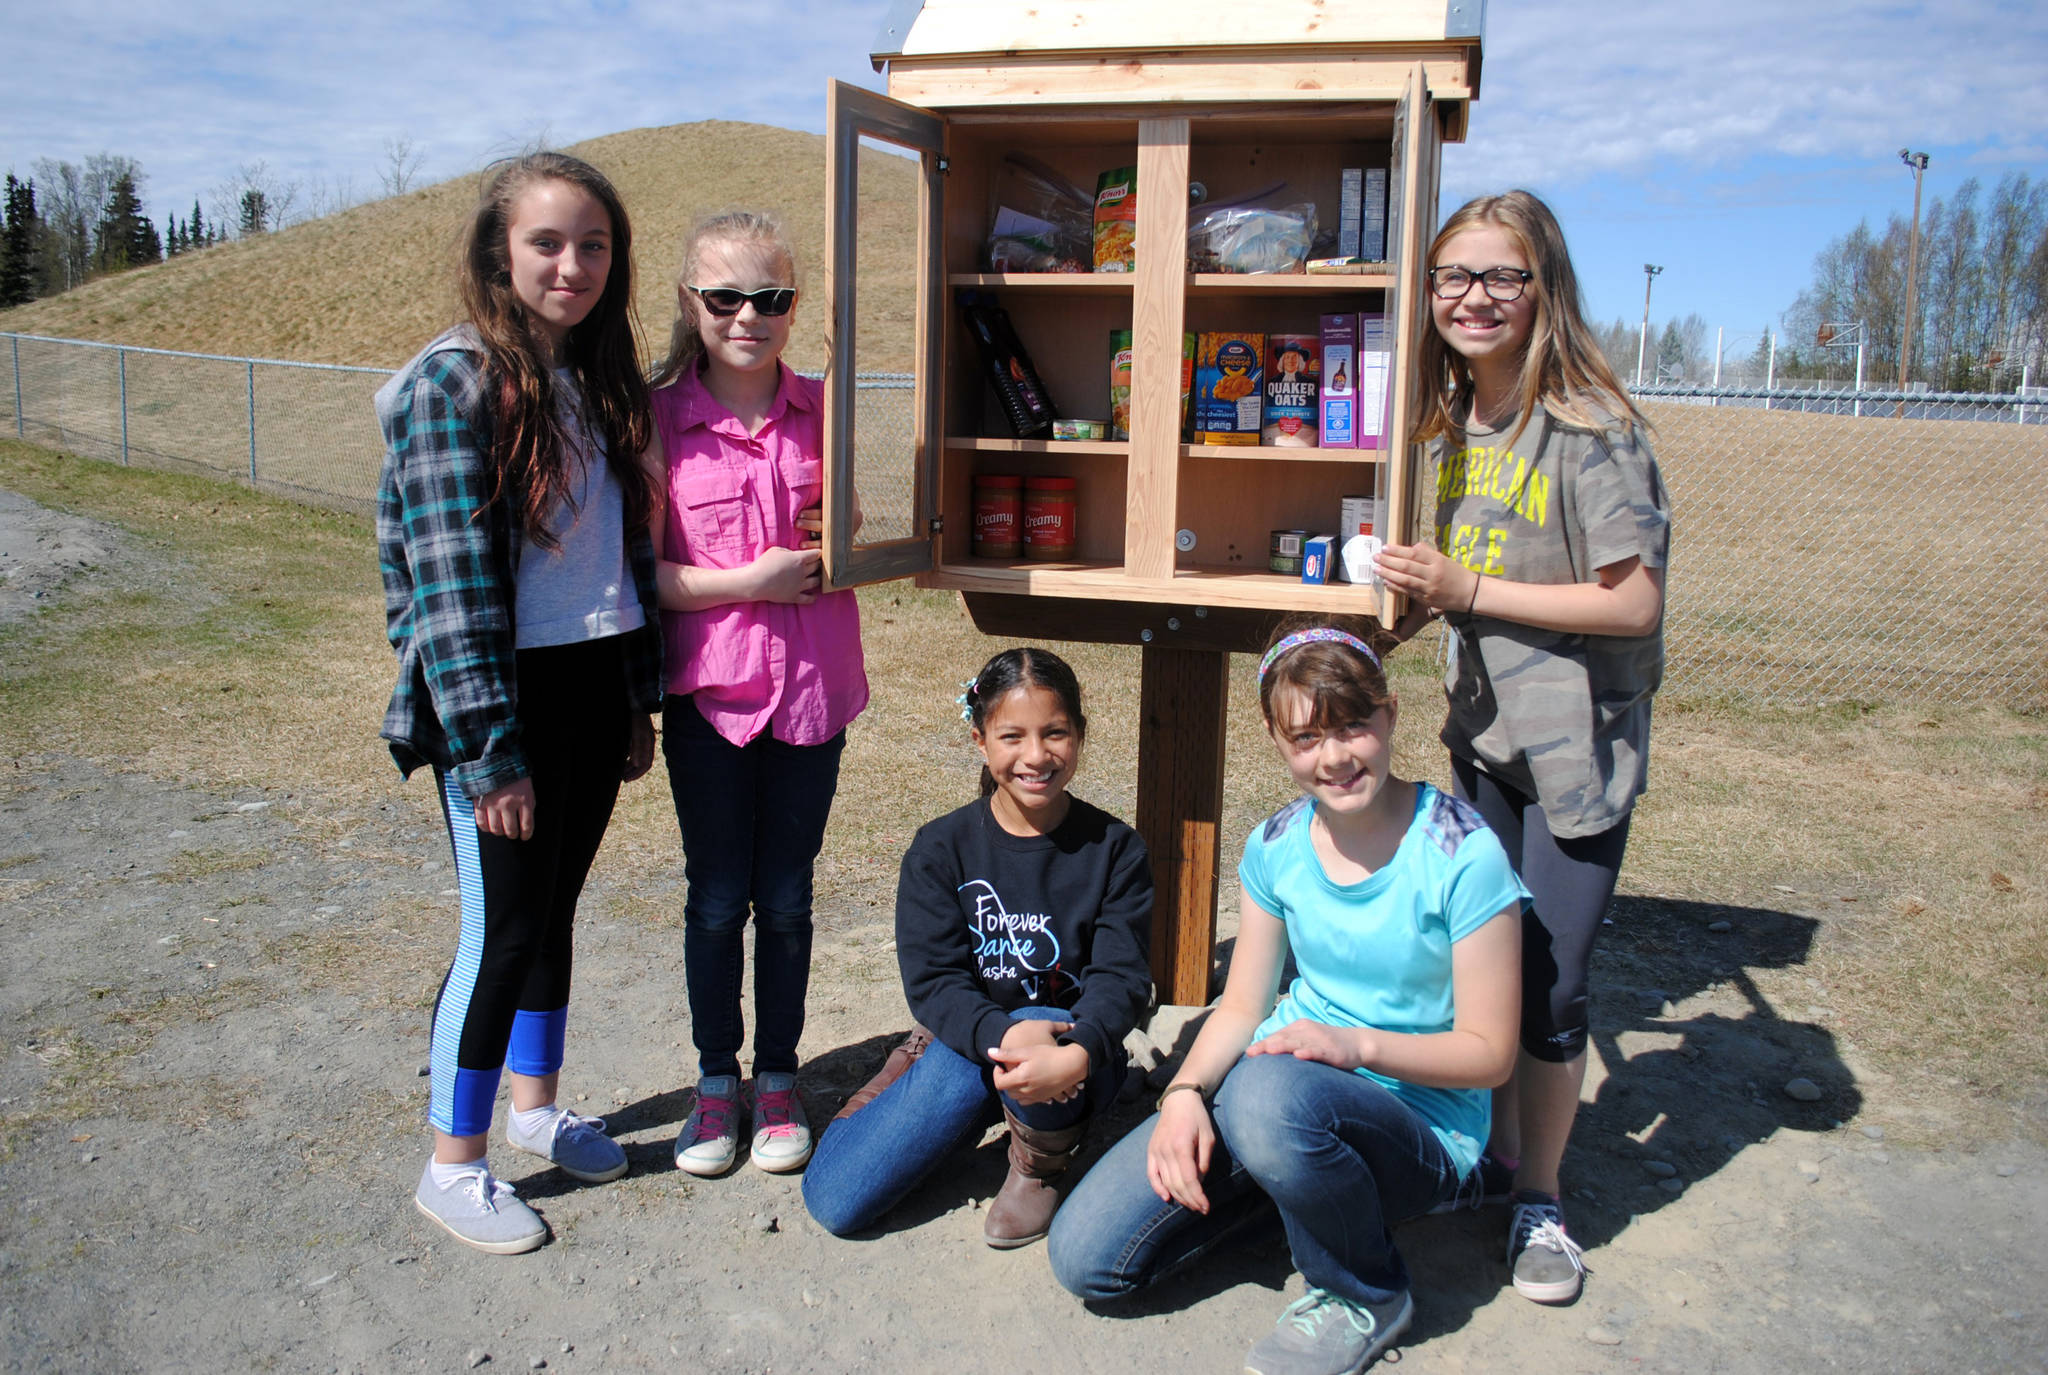 A group of Soldotna Montessori sixth-graders presented the idea for the Food Pantry to Soldotna City Council in order to make their vision a reality. The food pantry officially opened on Friday, May 12, 2017 in Soldotna, Alaska. (Kat Sorensen/Peninsula Clarion)